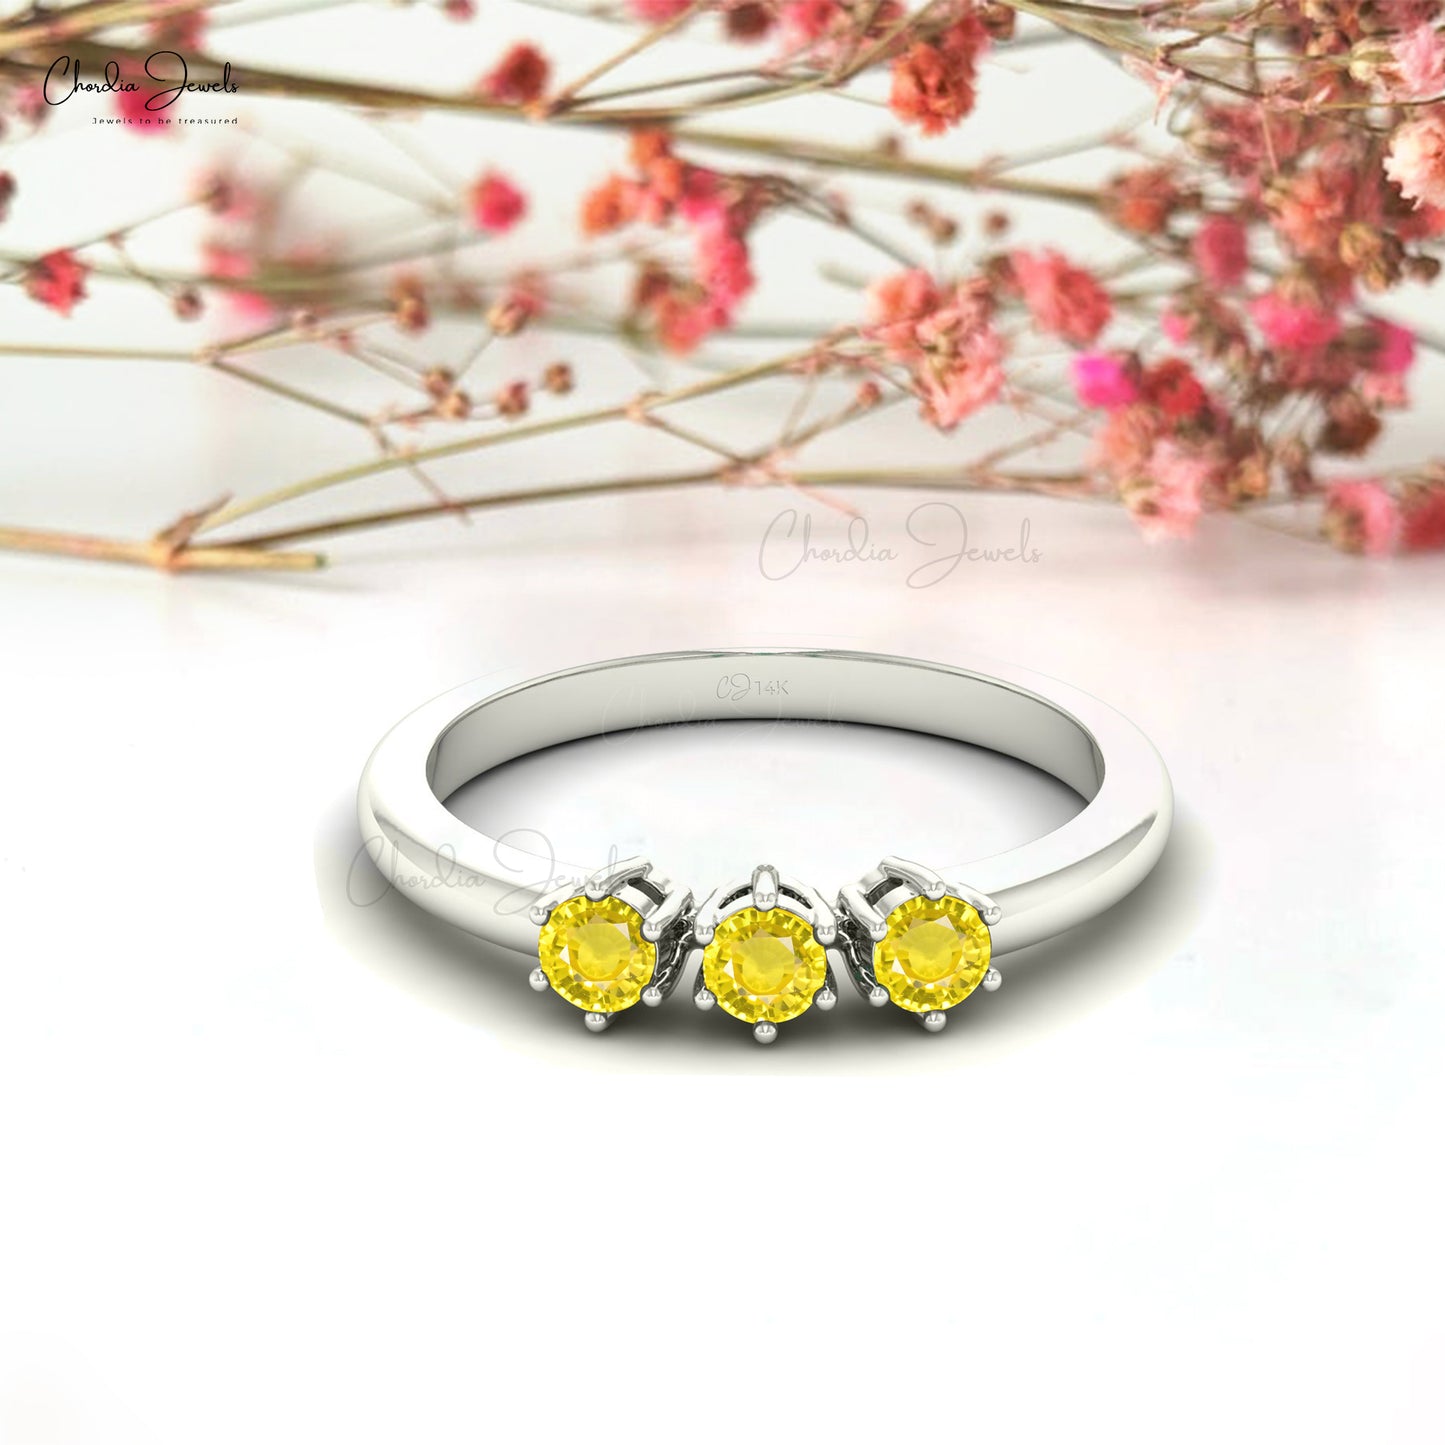 Is Yellow Sapphire A Safe Gemstone To Wear Irrespective Of The Zodiac Sign?